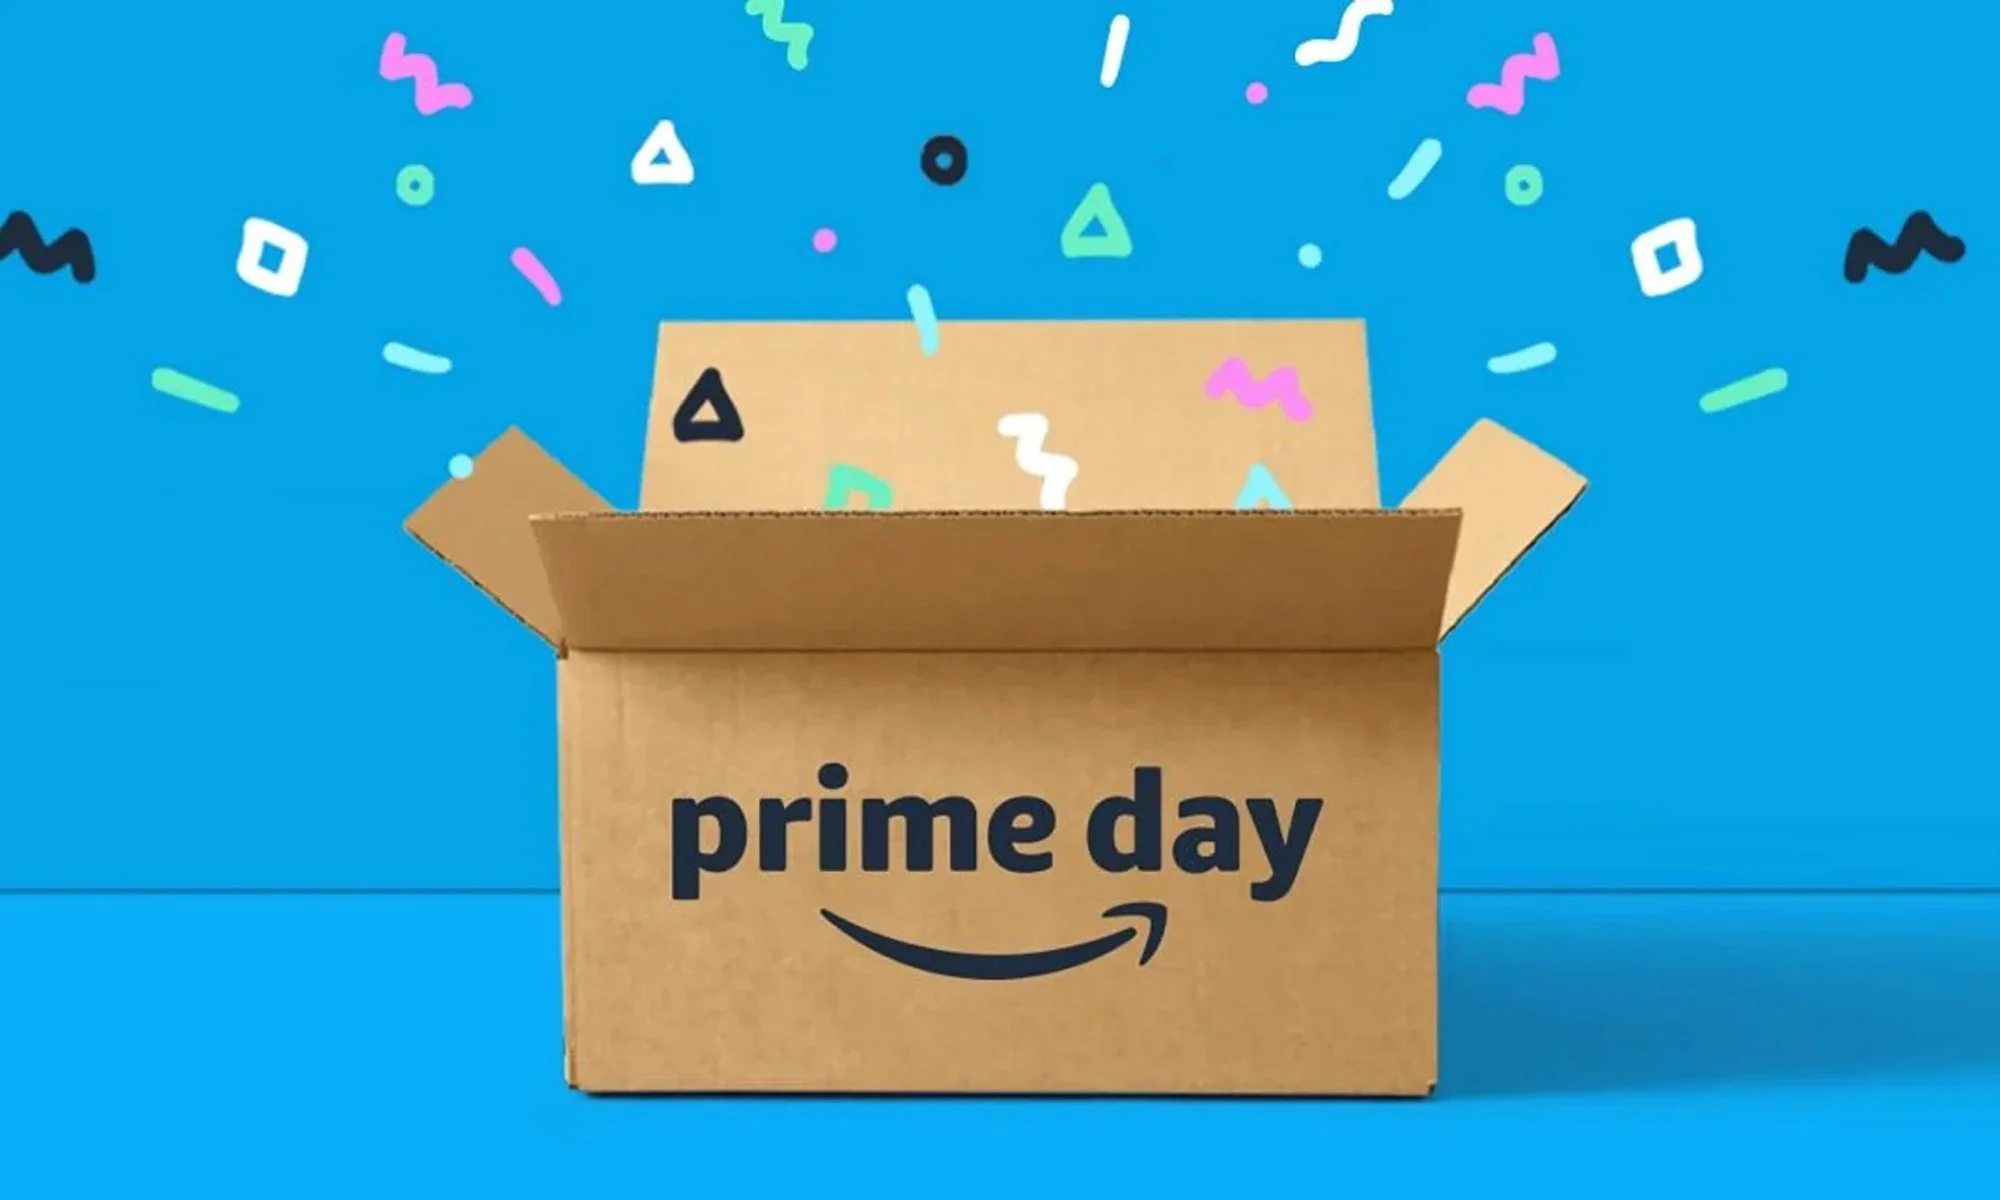 Cardboard box with words "prime day" on it on blue background.